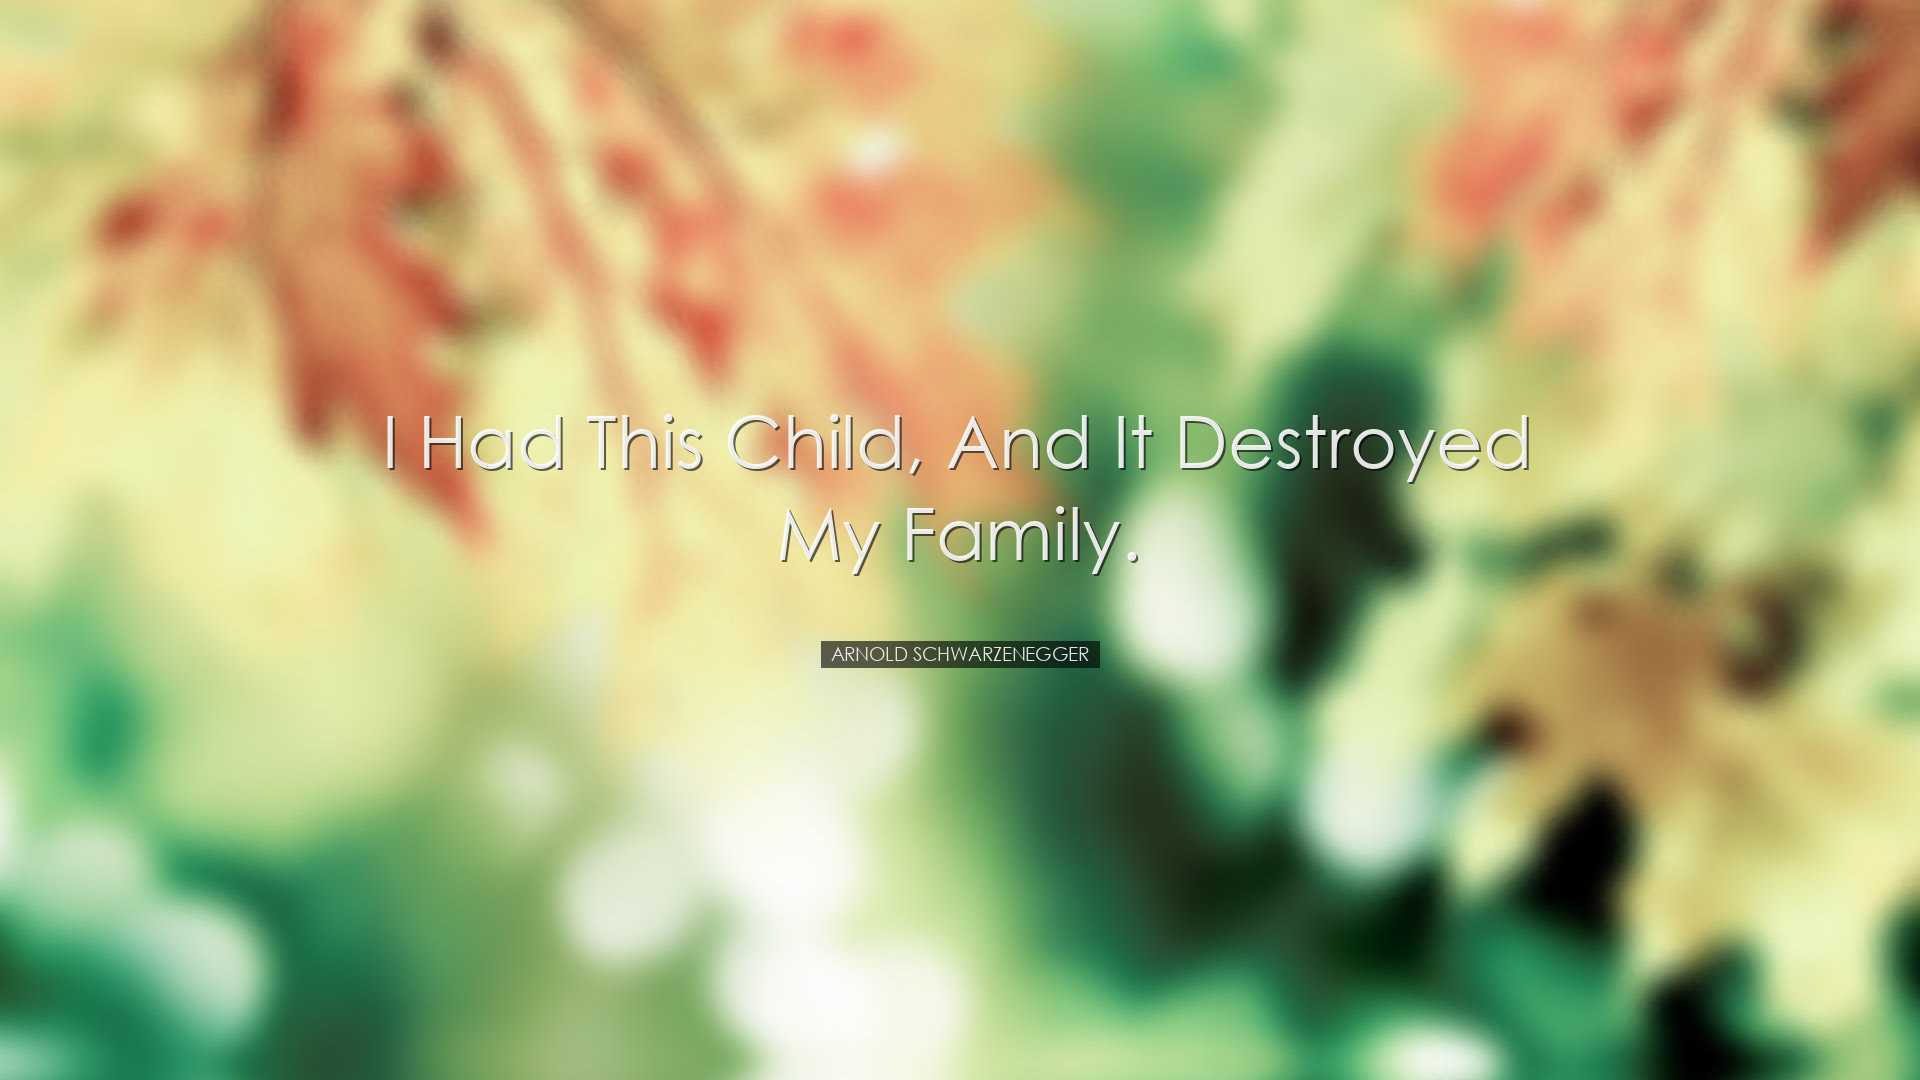 I had this child, and it destroyed my family. - Arnold Schwarzeneg